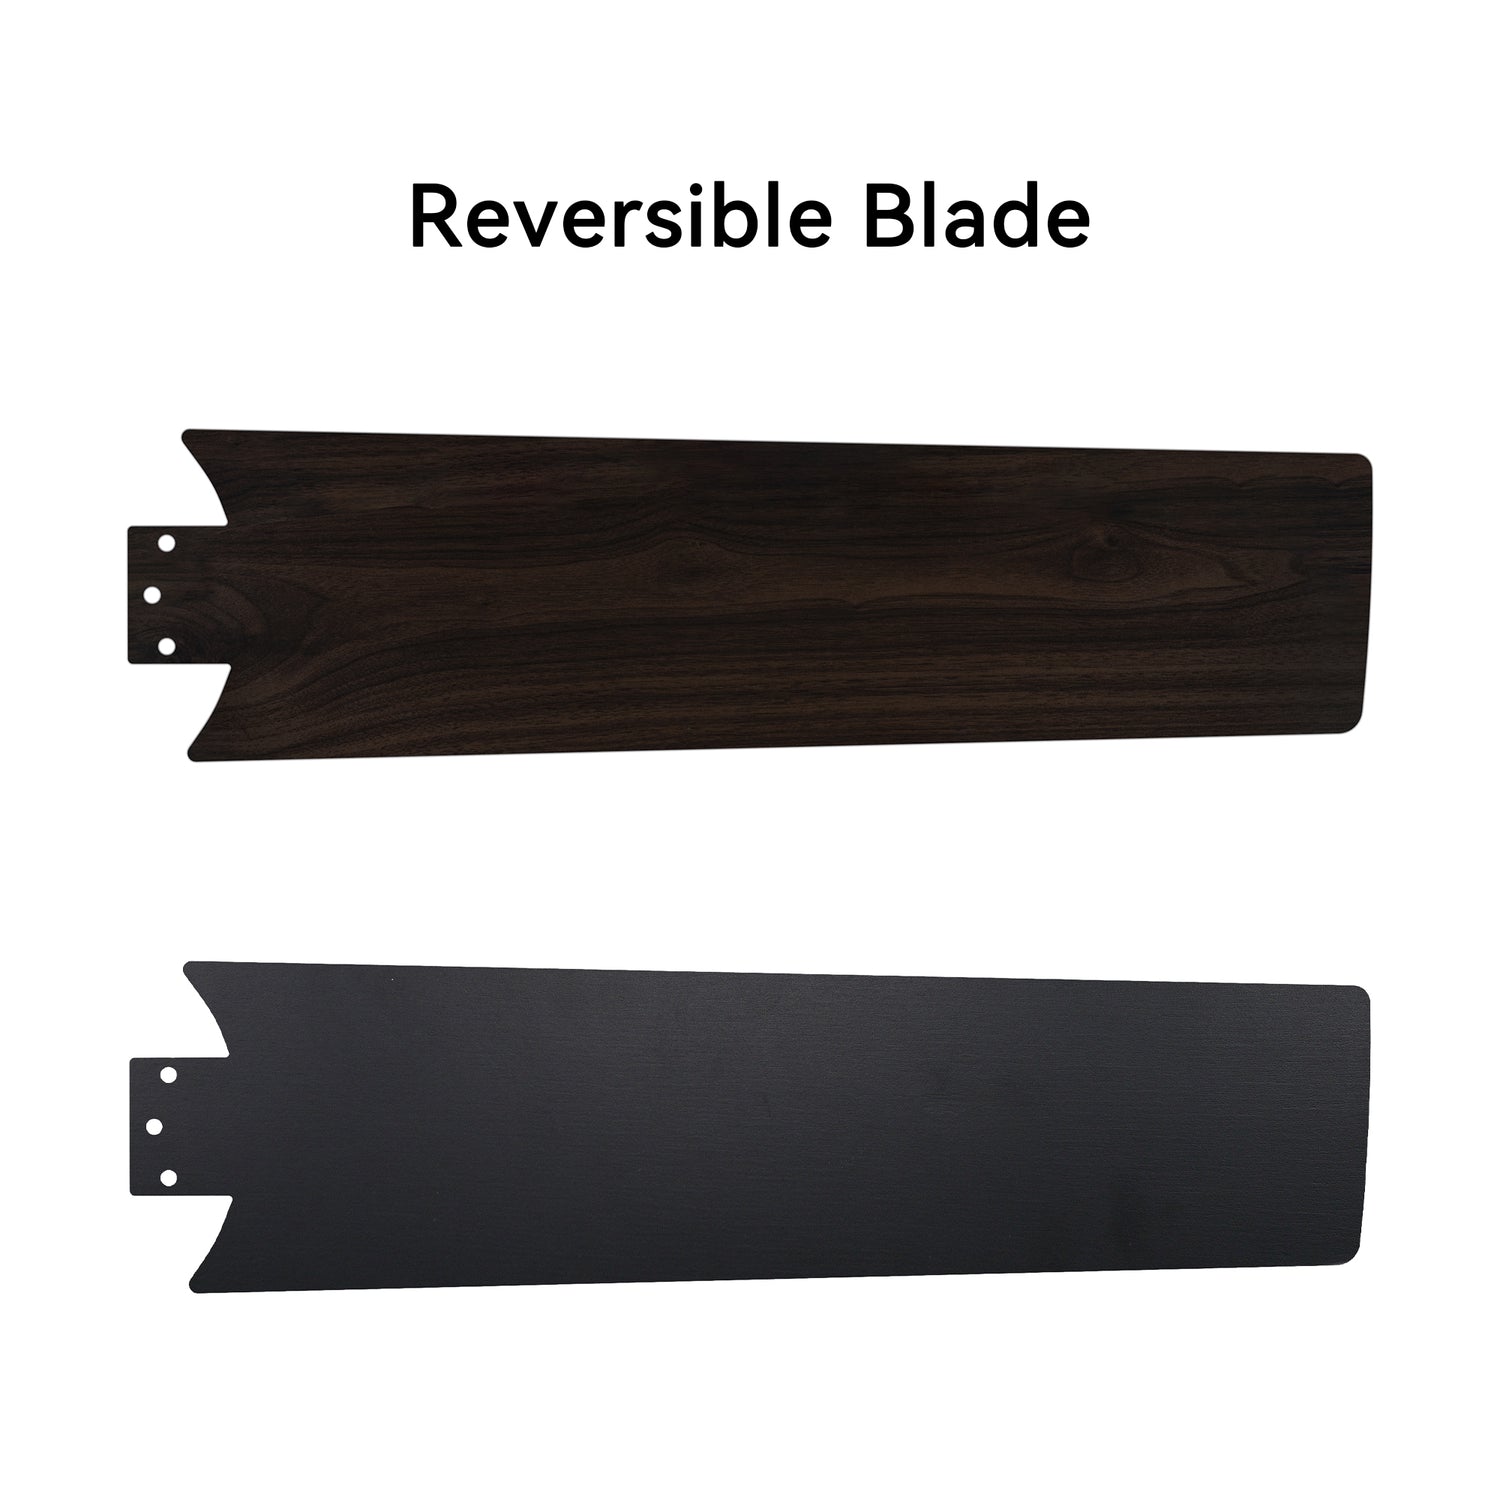 Low profile ceiling fan with reversible plywood blades, such as black and dark wood pattern. 